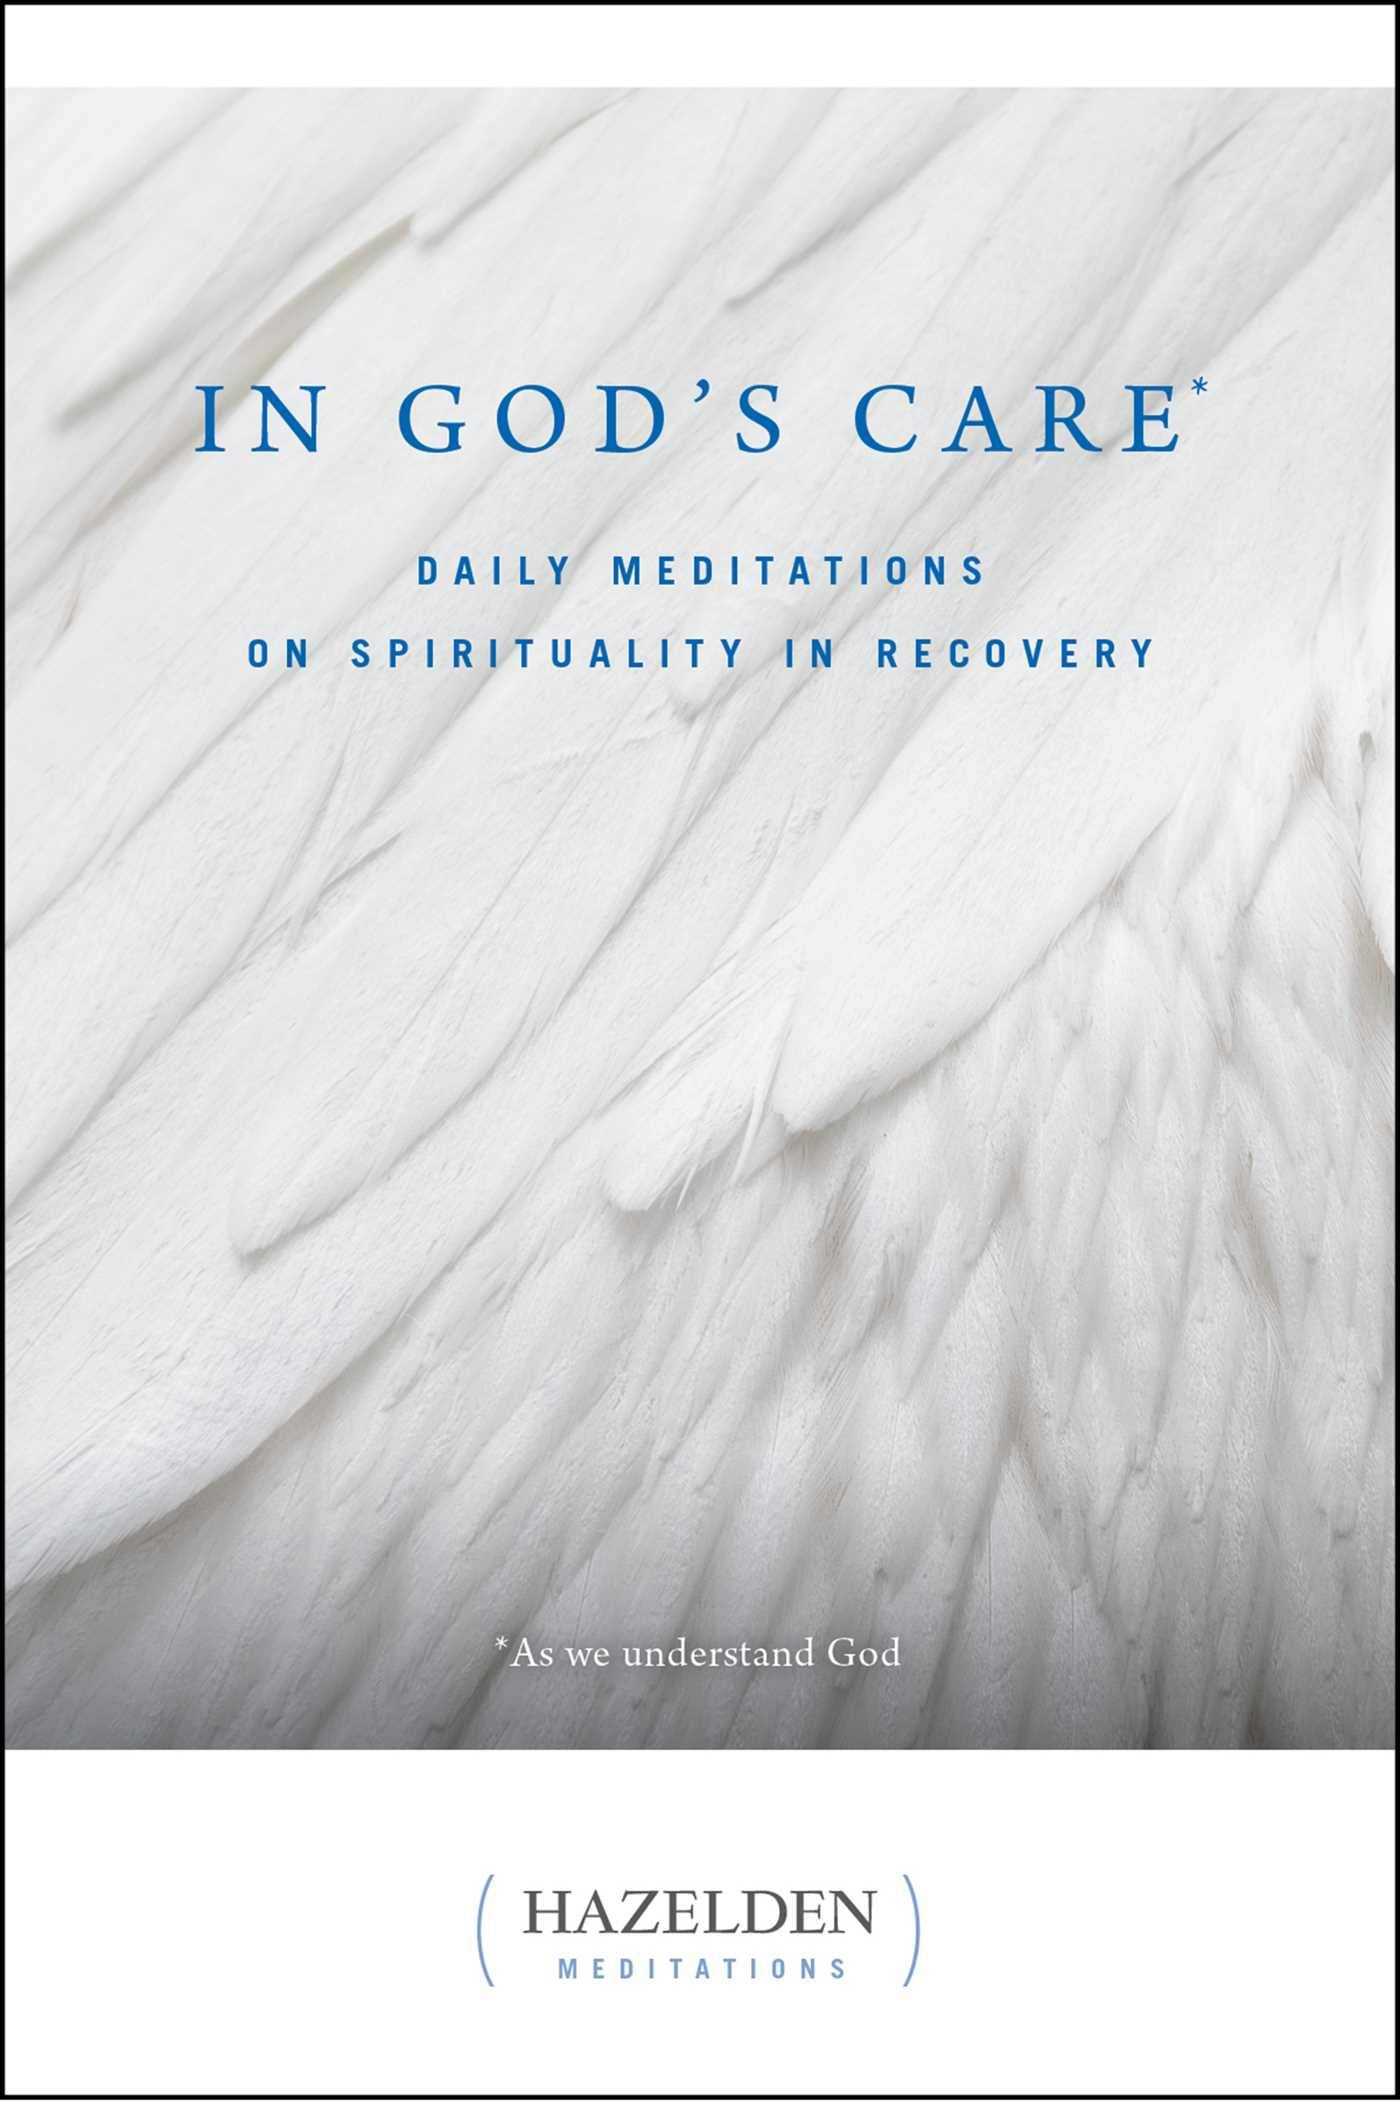 In God's Care: Daily Meditations on Spirituality in Recovery - Karen Casey, Homer Pyle